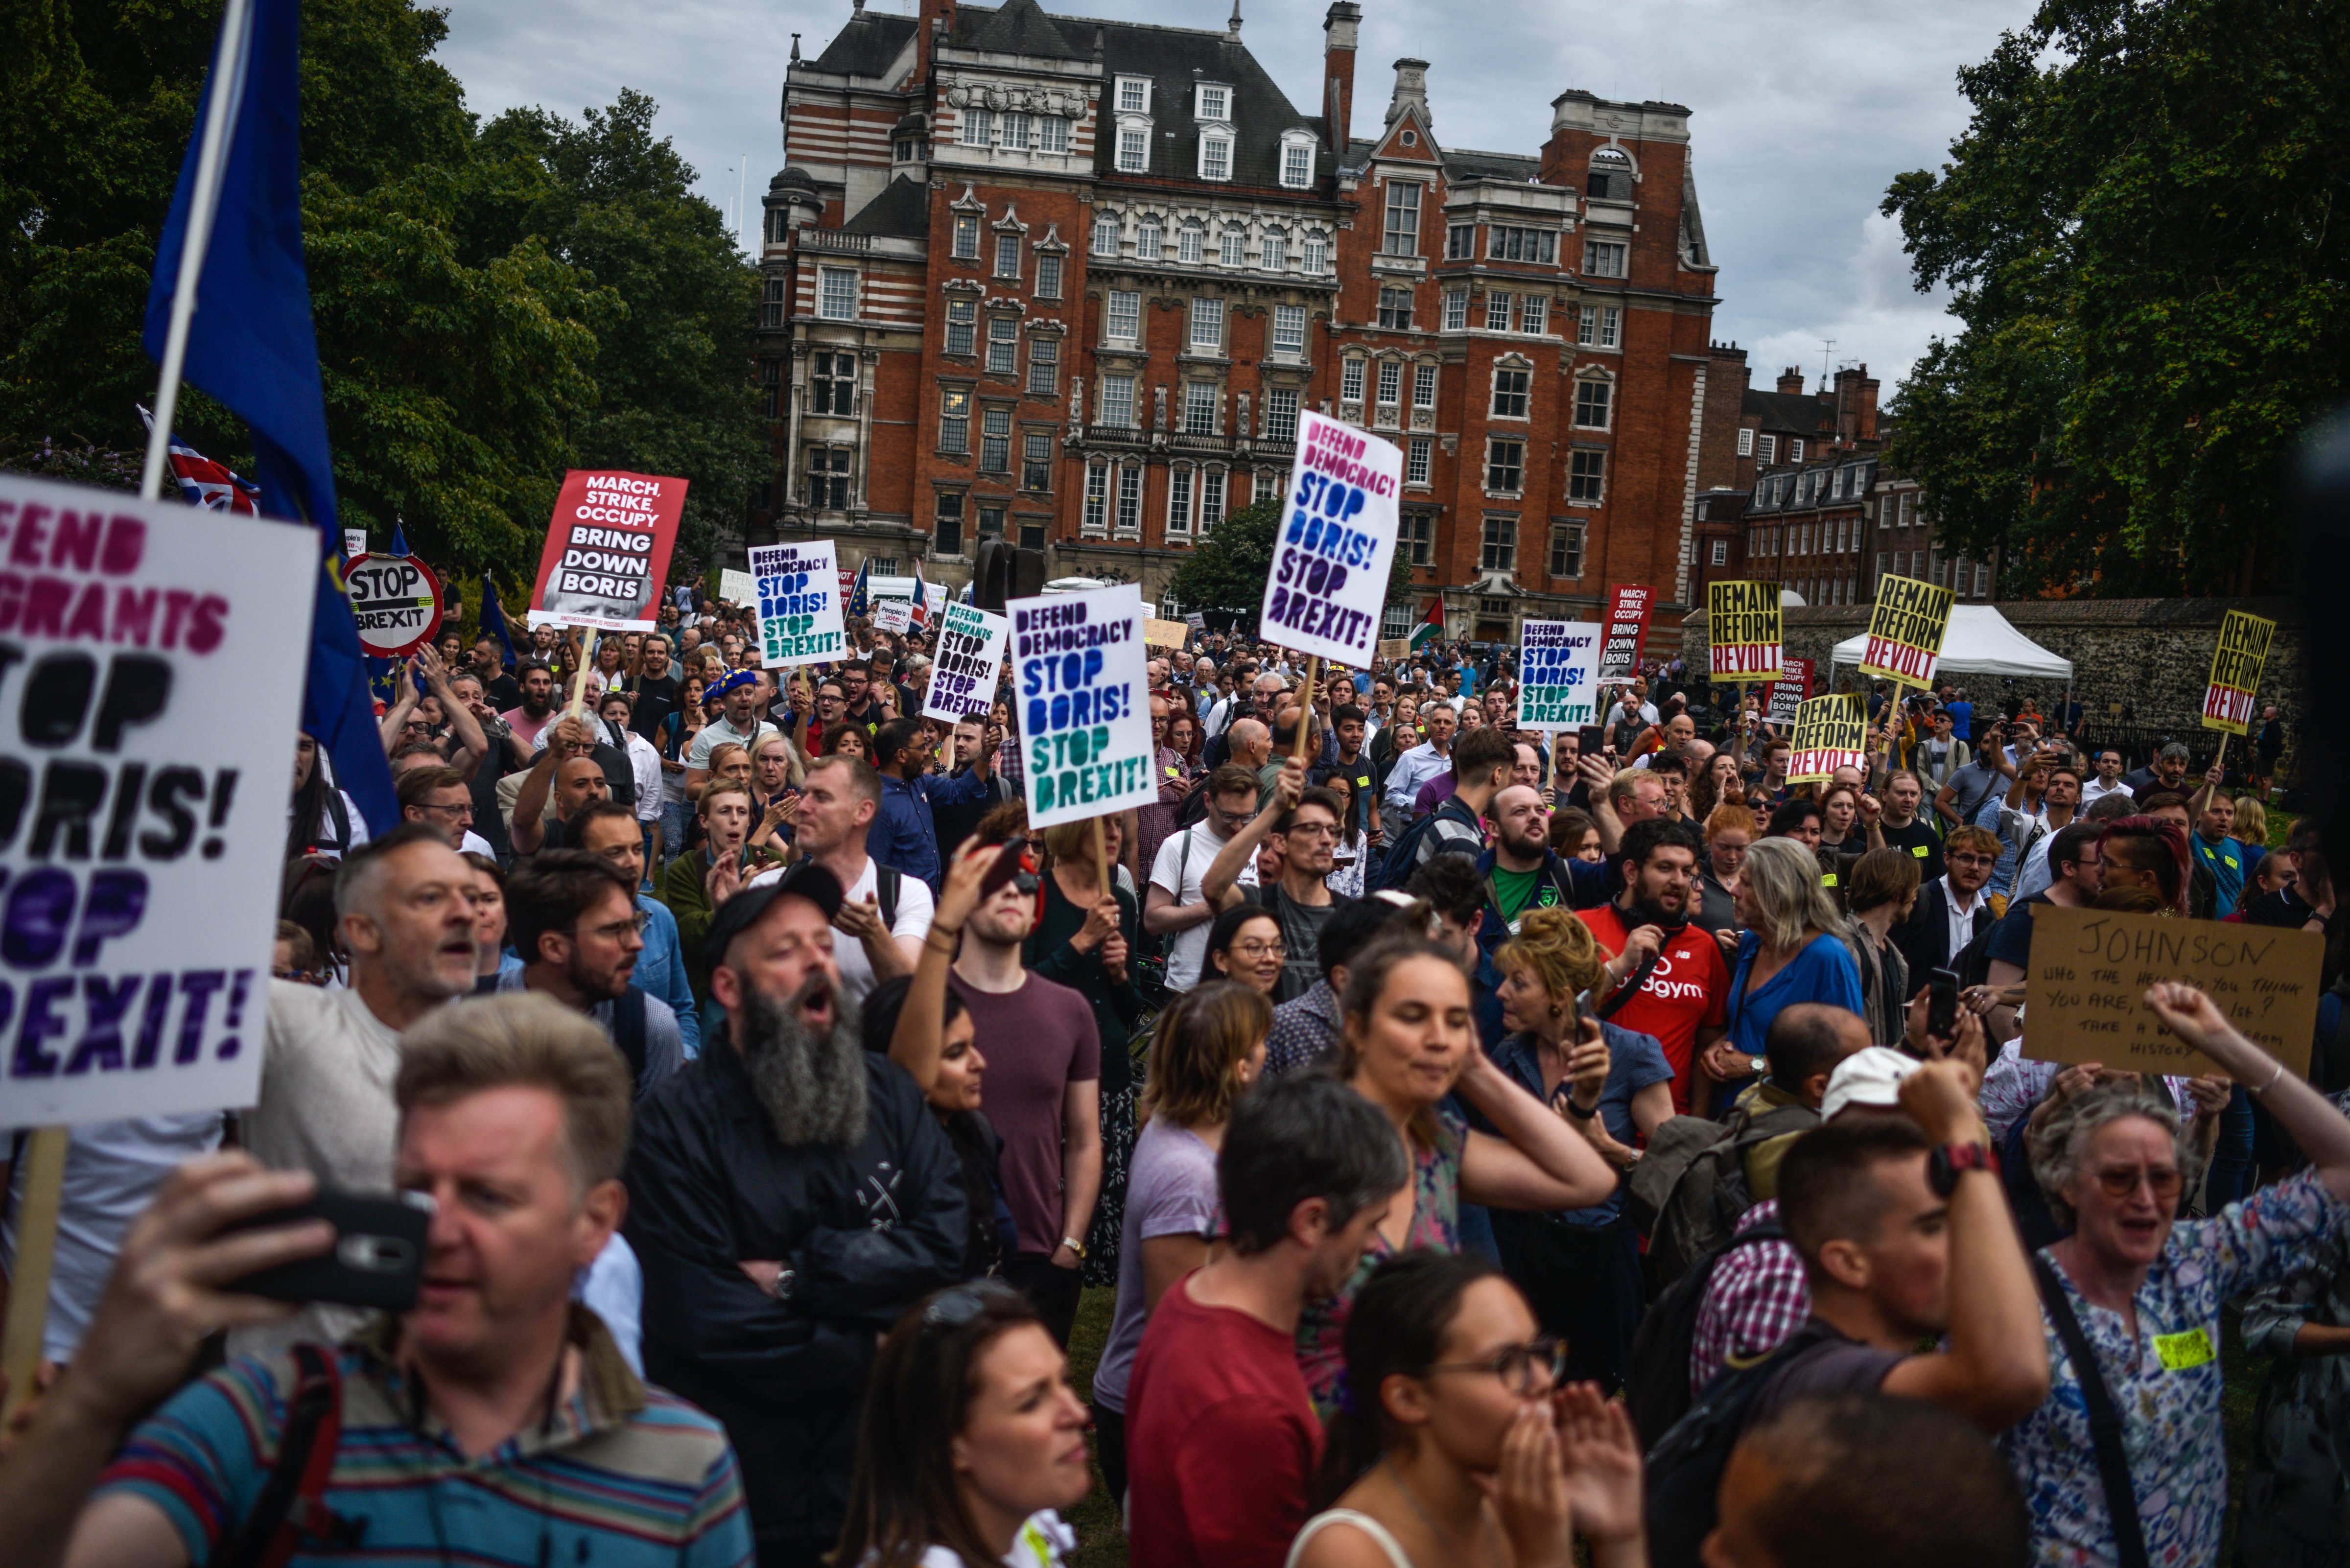 Pro-EU supporters protest on College Green near the Houses of Parliament on August 28, 2019 in London, England. (Peter Summers—Getty Images)